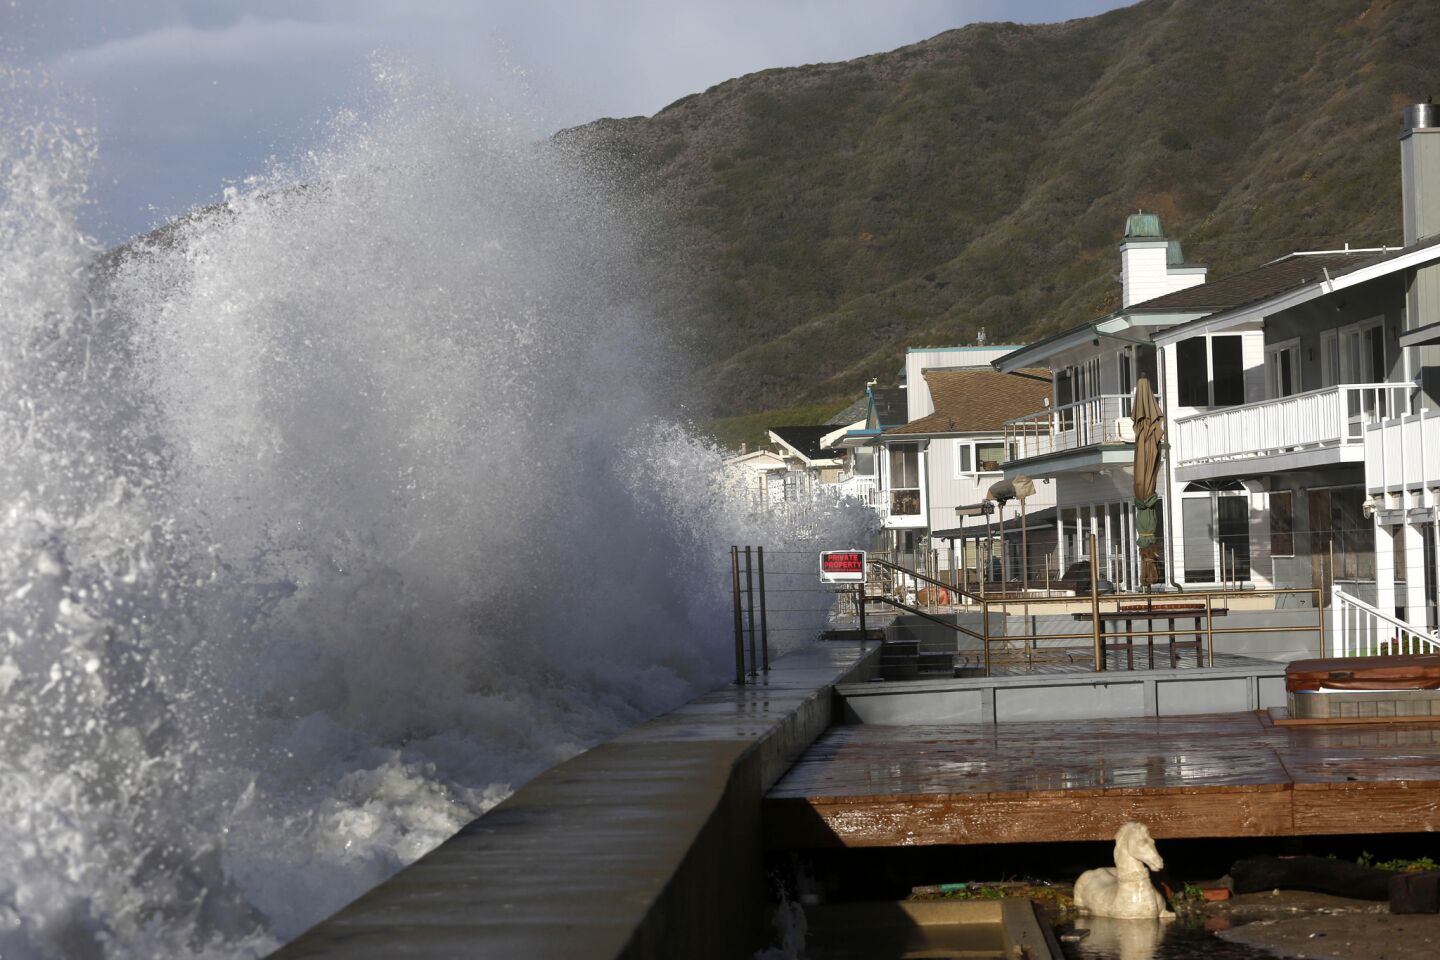 A big northwest swell combined with a high tide on Thursday morning along the southern California coast resulting in seaside communities being battered. Faria Beach in Ventura County was one of the areas especially hard hit.